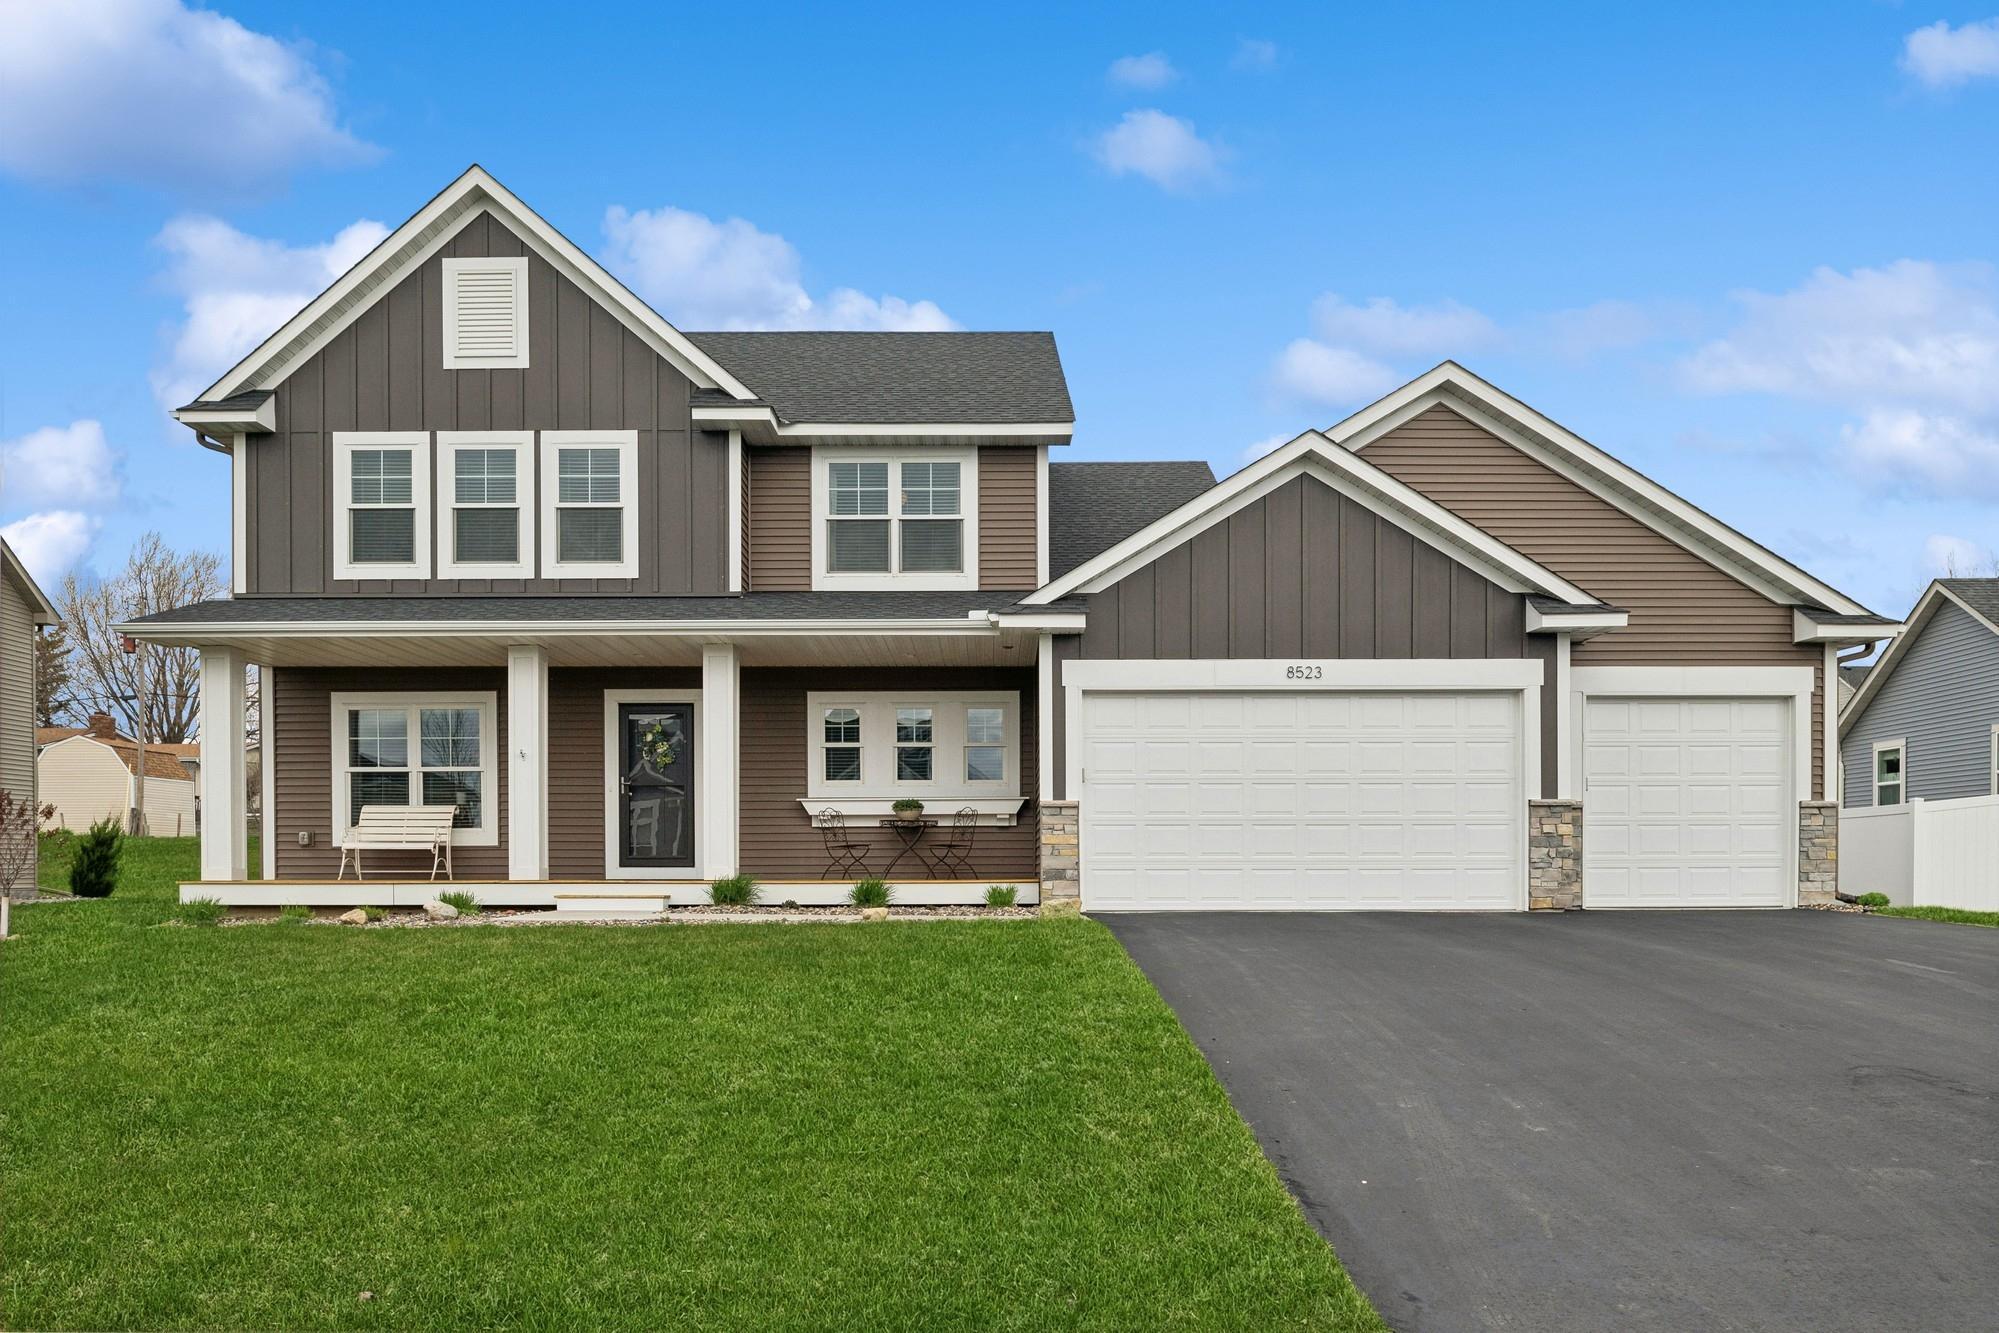 Welcome home to this stunning Country Joe home located in the popular Legacy neighborhood of Lakeville! This home has fantastic curb appeal and welcoming front porch.